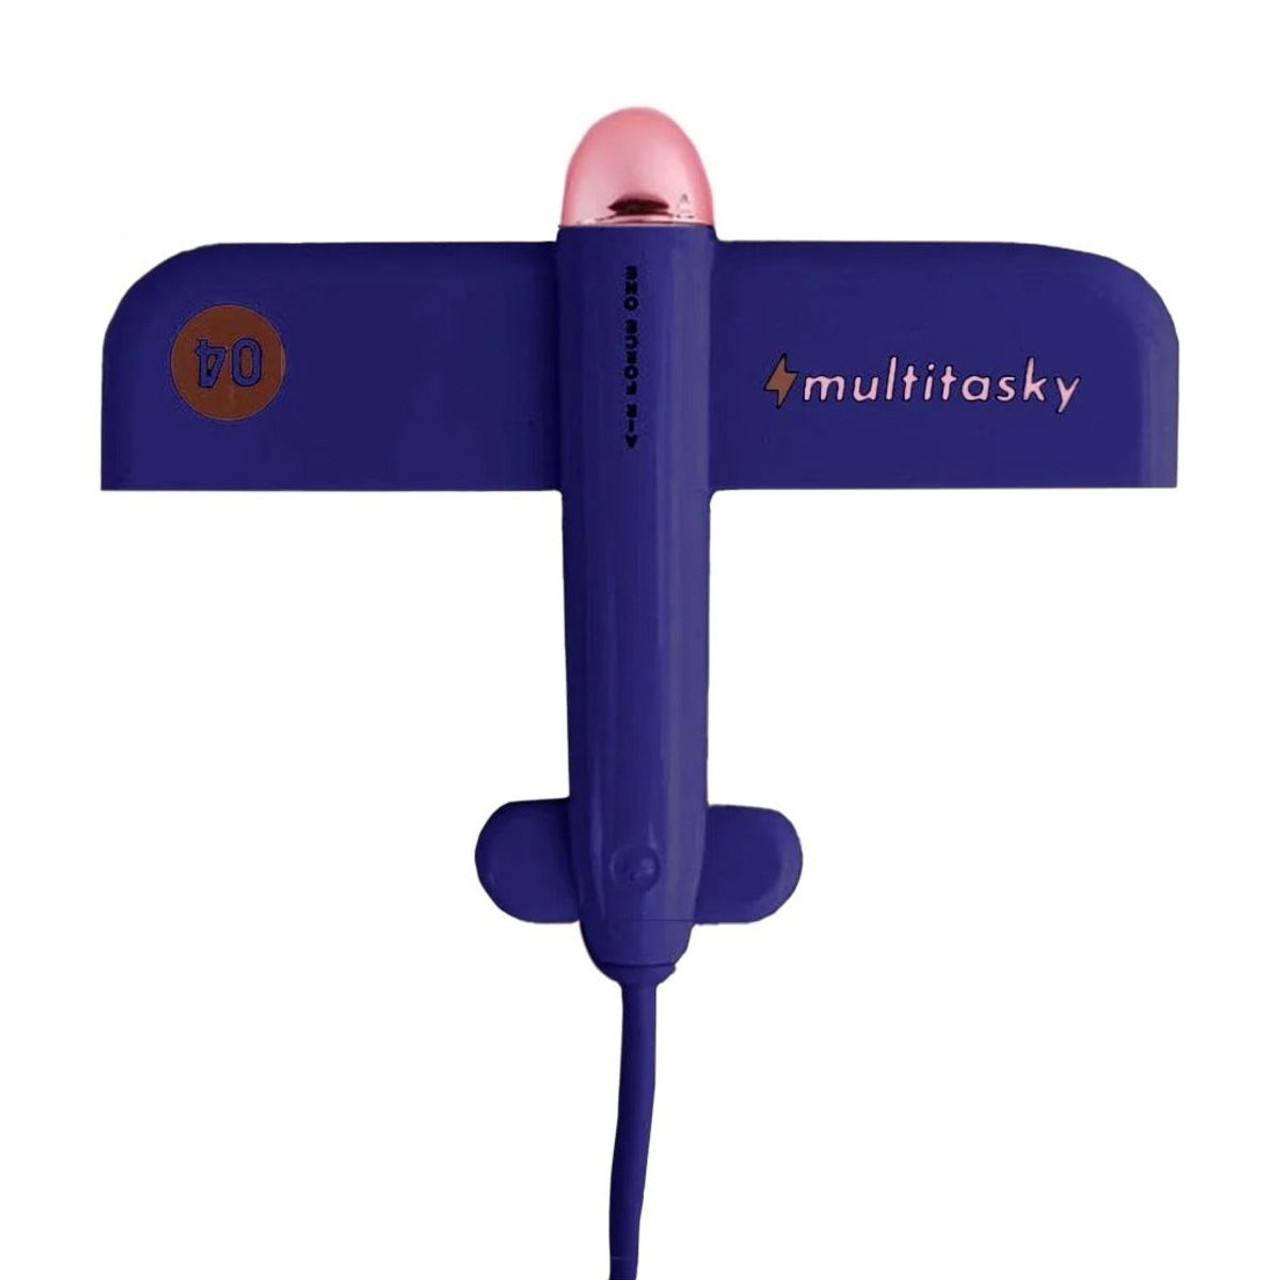 Flyport Cute Plane-Shaped 4-in-1 USB Hub by Multitasky™ product image